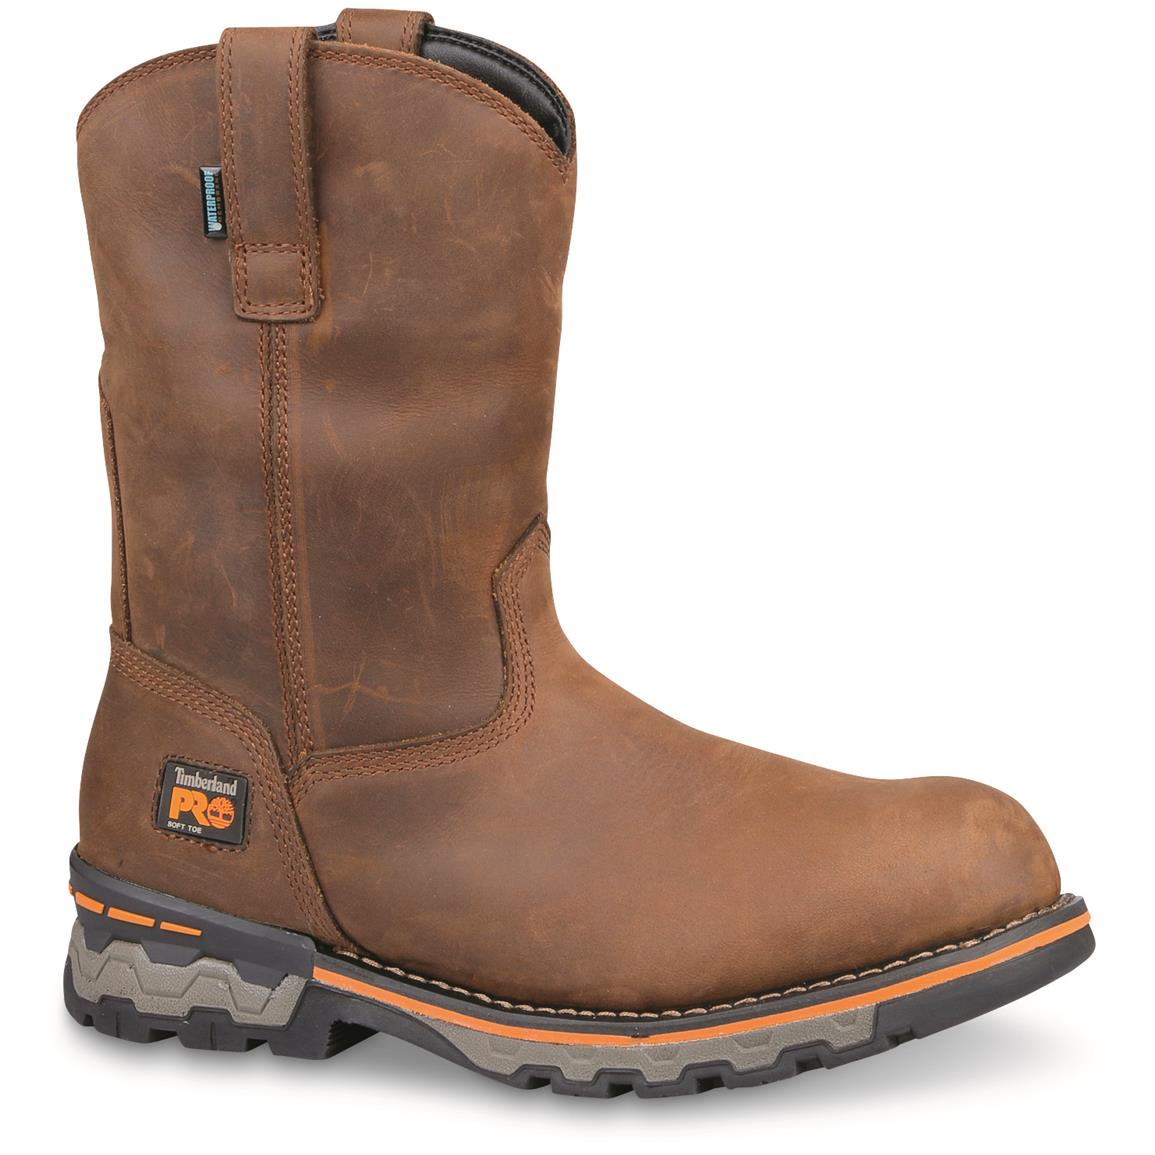 Timberland Men's PRO AG Boss Waterproof Soft Toe PullOn Work Boots 680813, Work Boots at